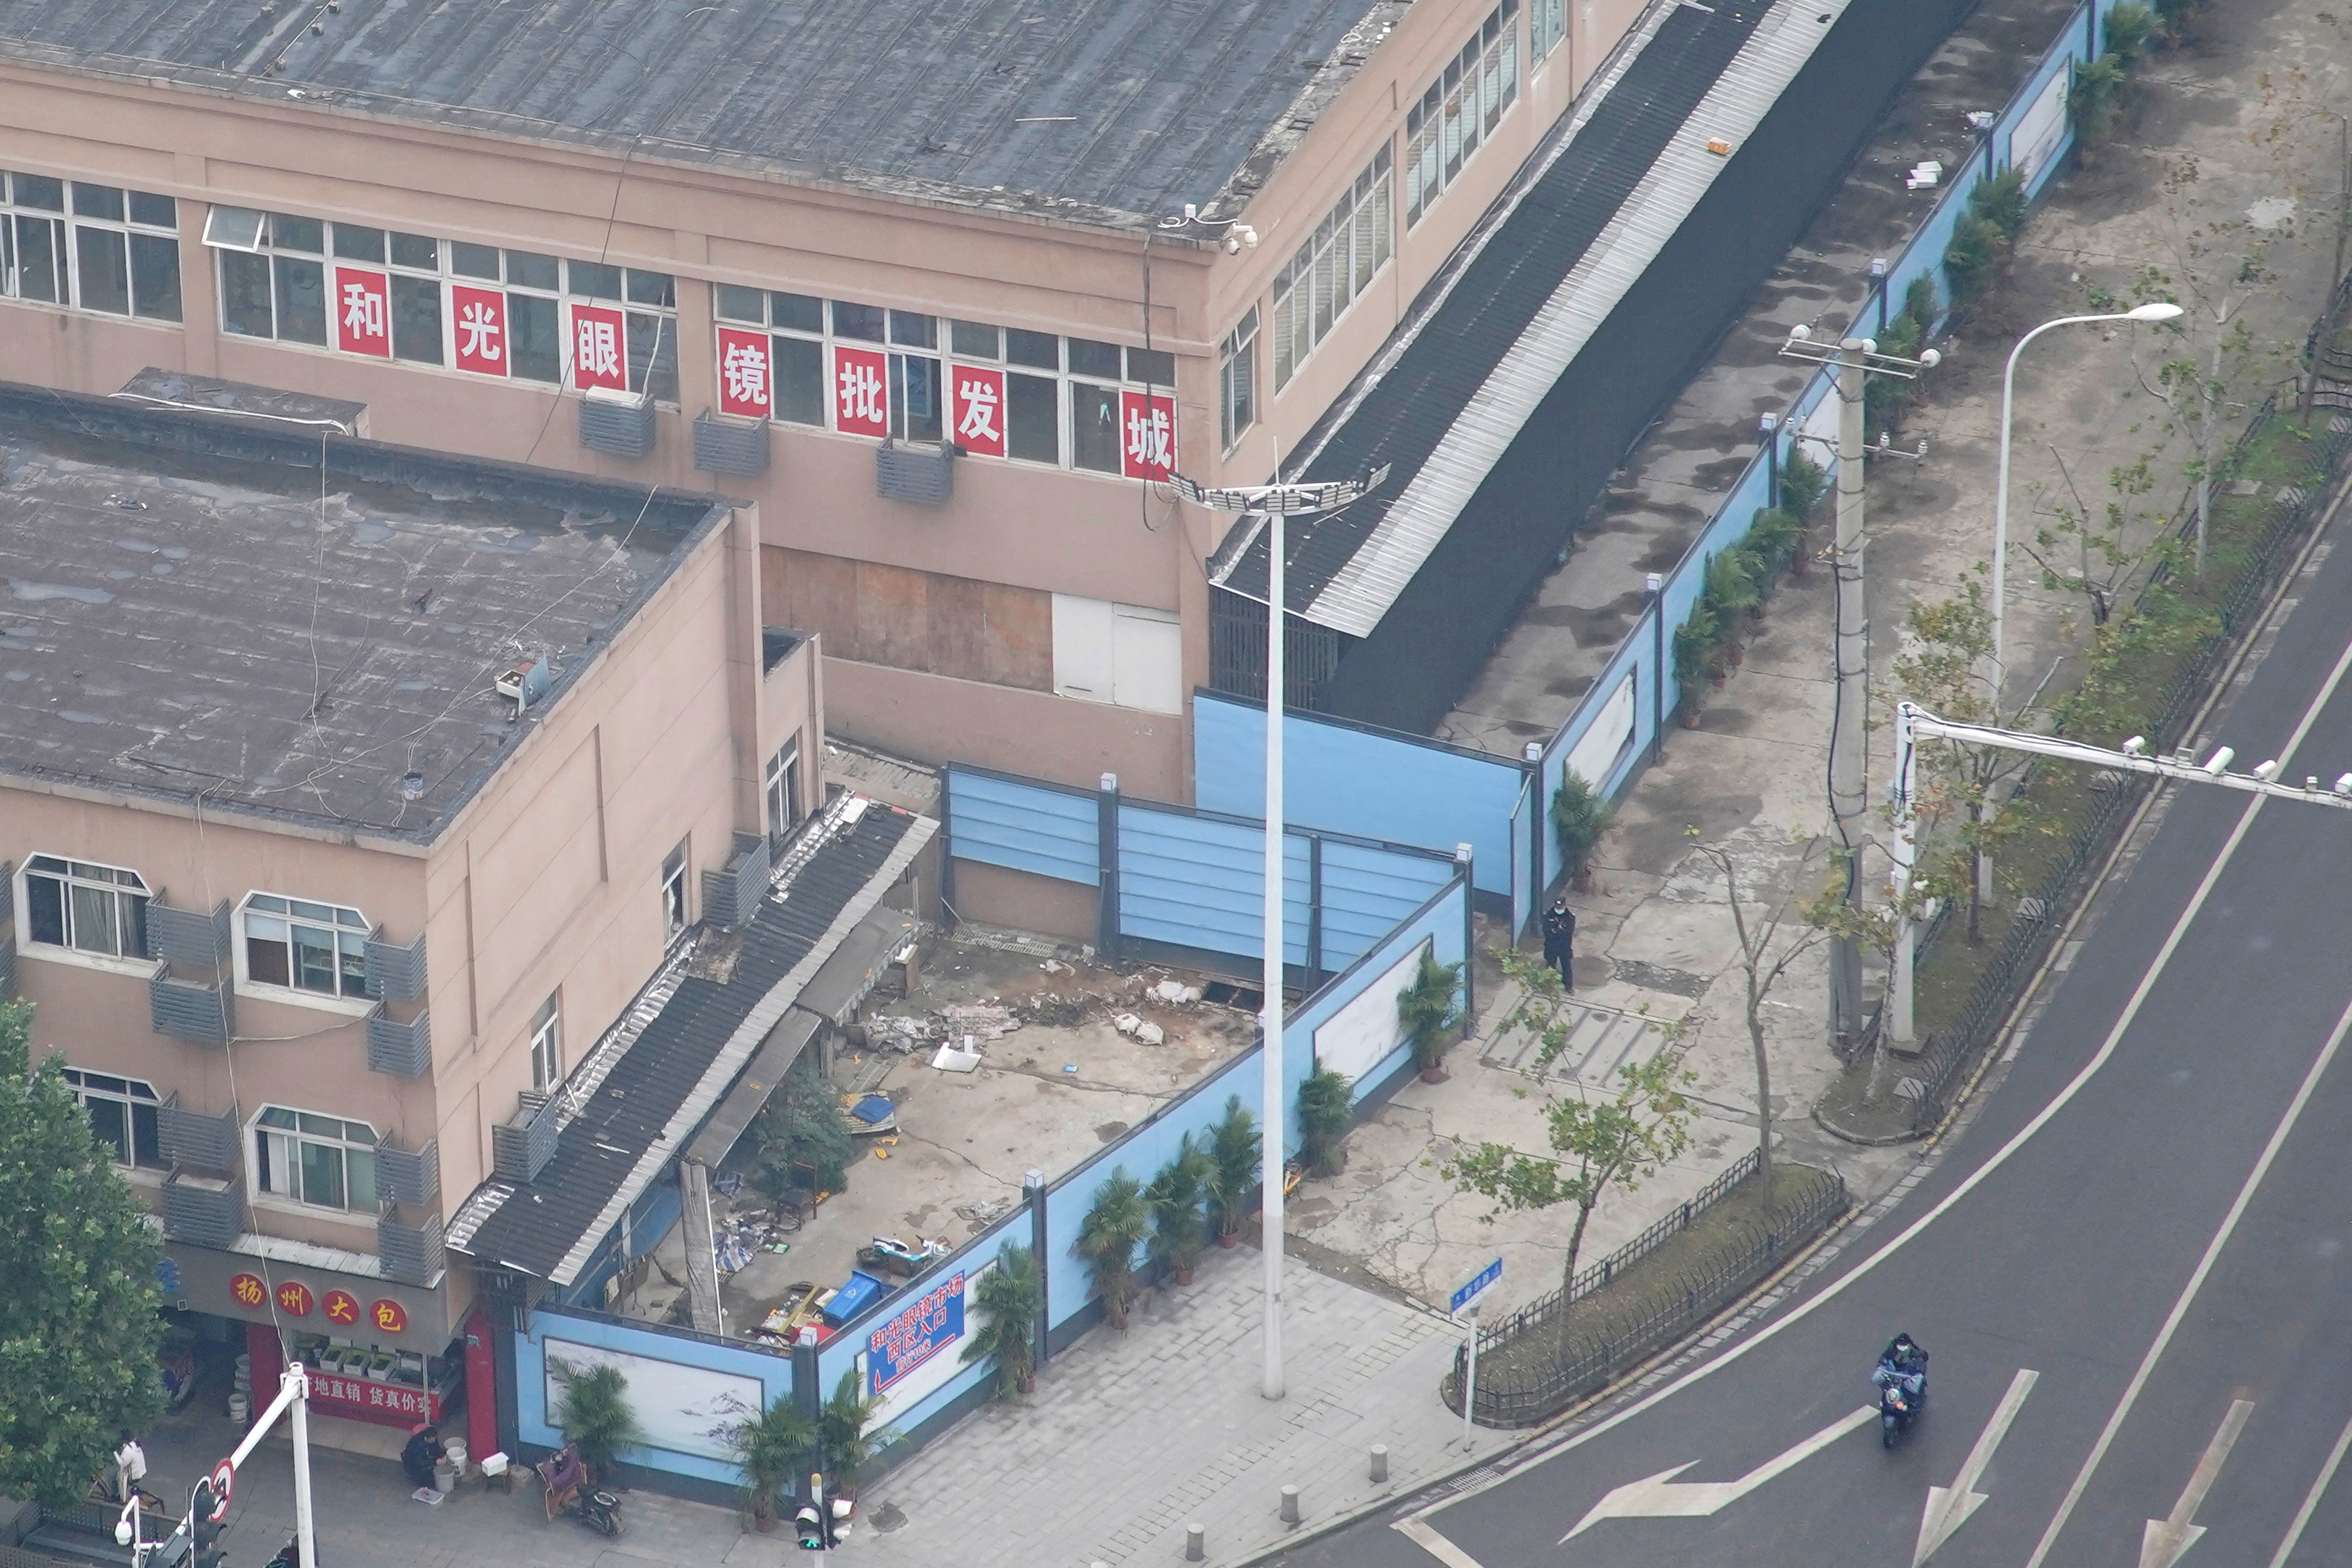 The building of Huanan seafood market, where the second floor remains open for optics stores, and where coronavirus believed to have first surfaced, almost a year after the start of the coronavirus disease (COVID-19) outbreak, in Wuhan